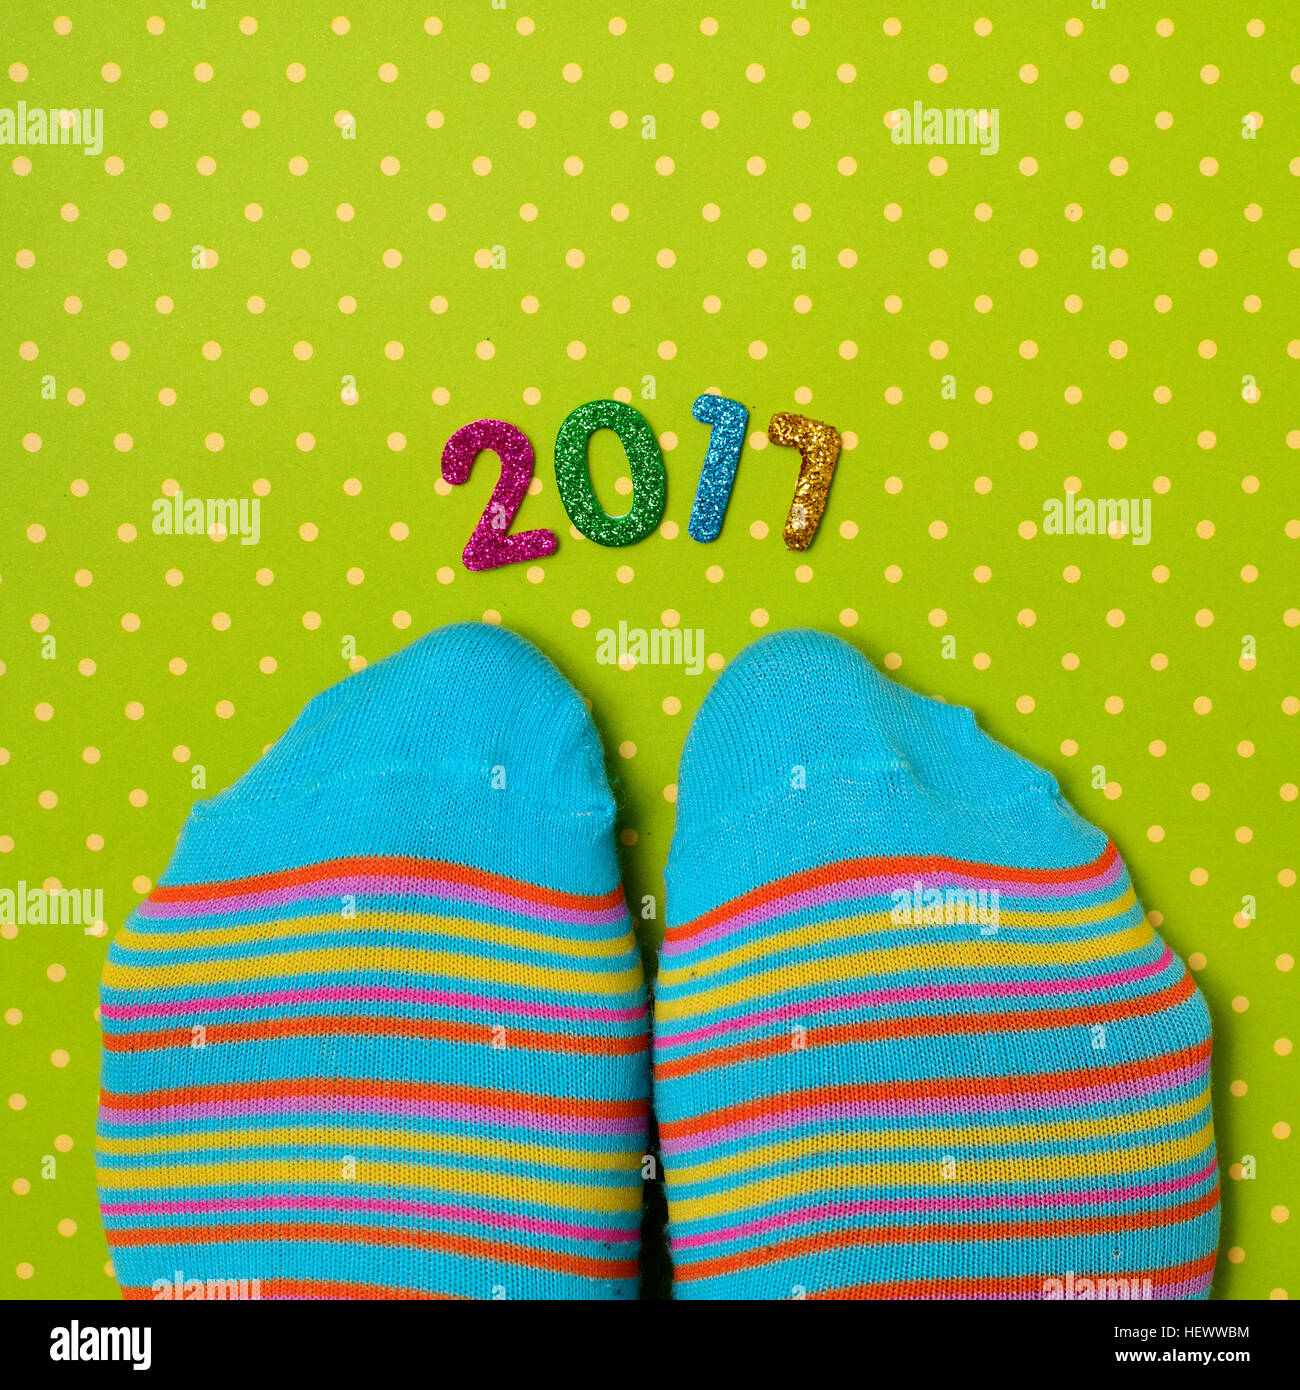 high-angle shot of a pair of feet wearing colorful striped socks and some glittering numbers of different colors forming the number 2017, as the new y Stock Photo